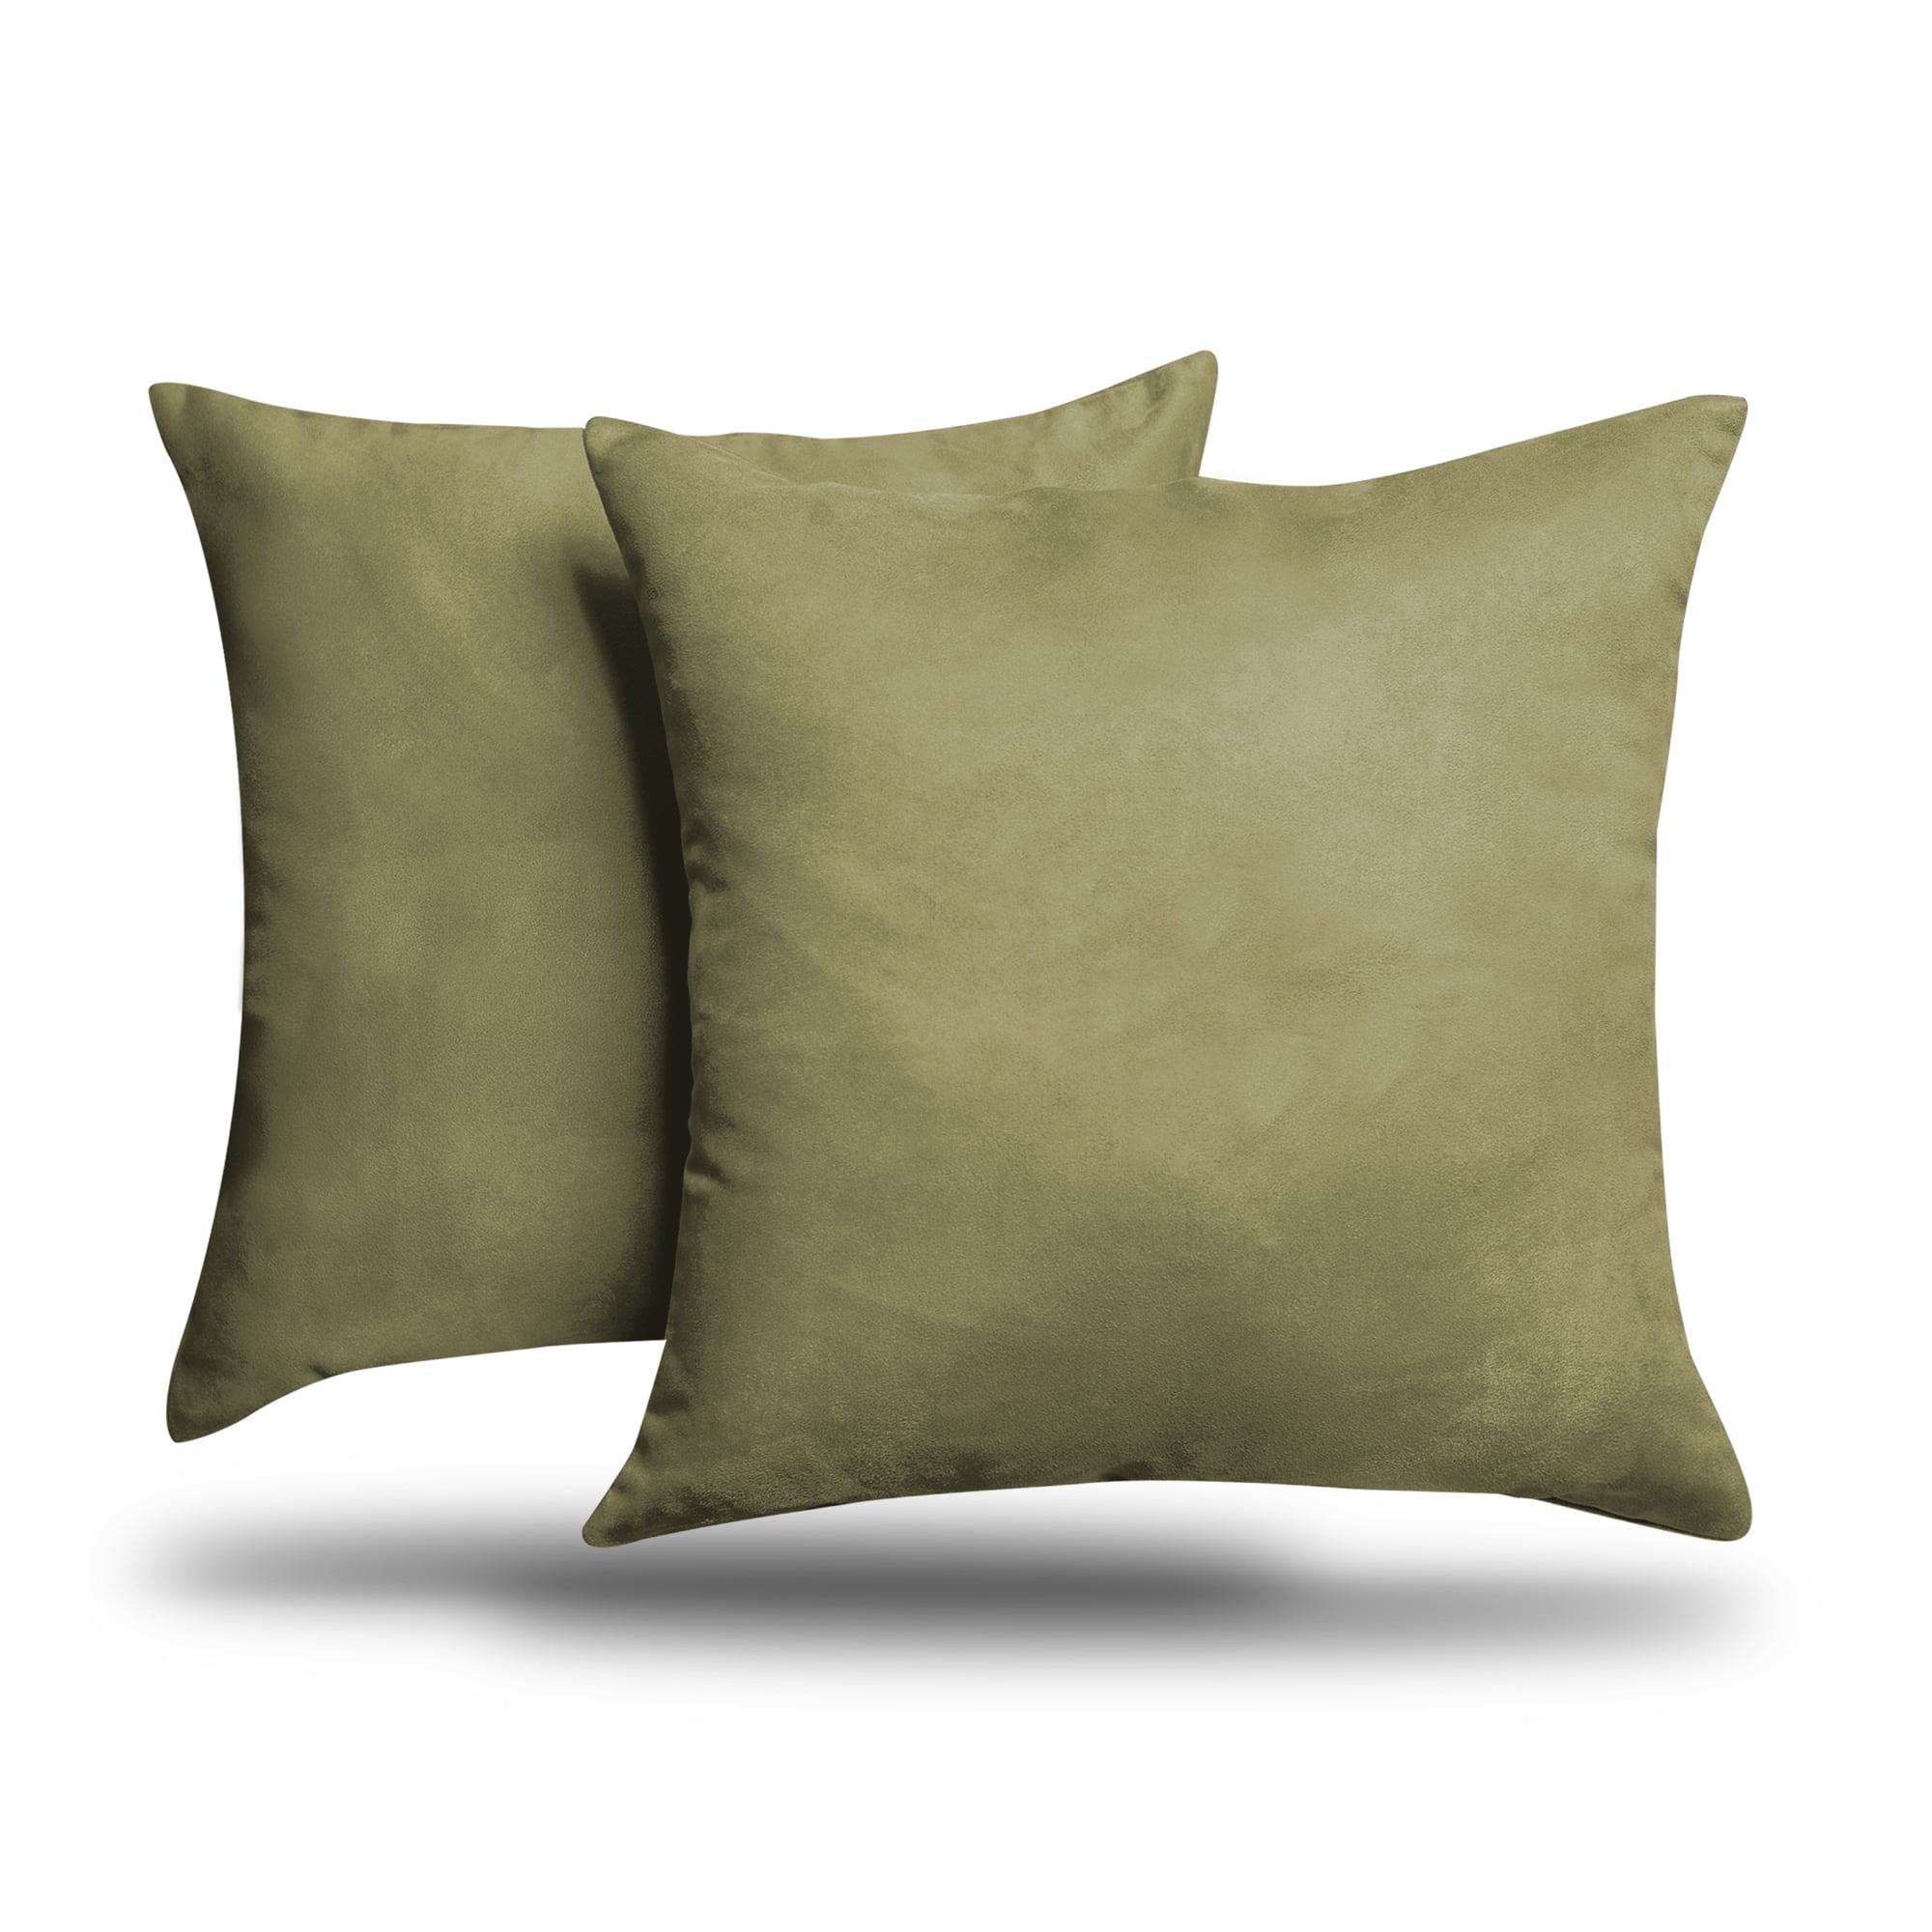 Pack of 2 Solid Faux Suede Soft Decorative Square Throw Pillow Covers for Sofa Living Room and